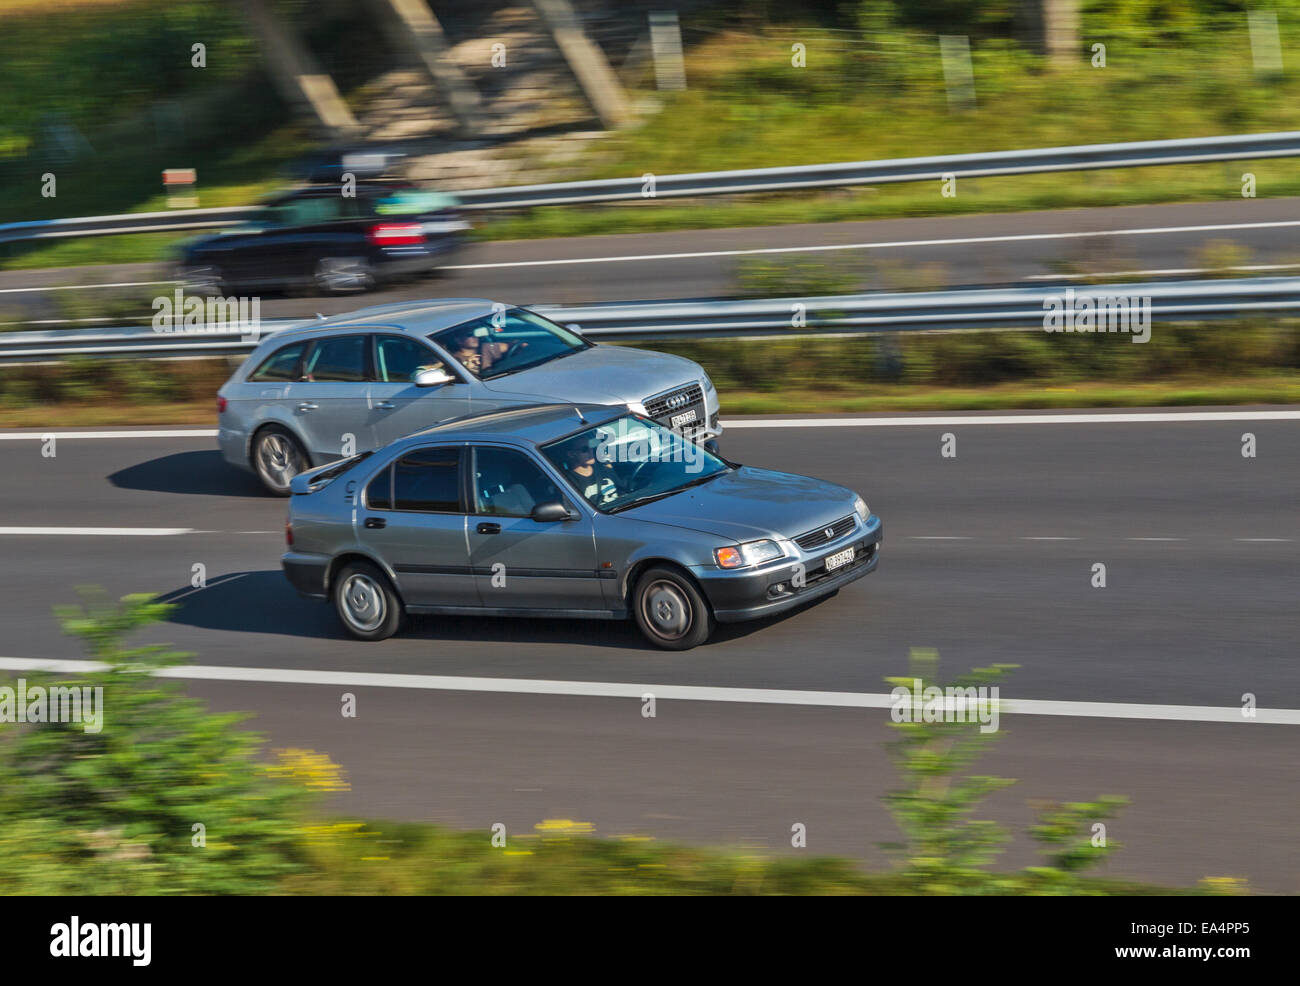 Two cars speeding along a motorway, one overtaking the other. Motion blur used to give a sense of speed. Stock Photo